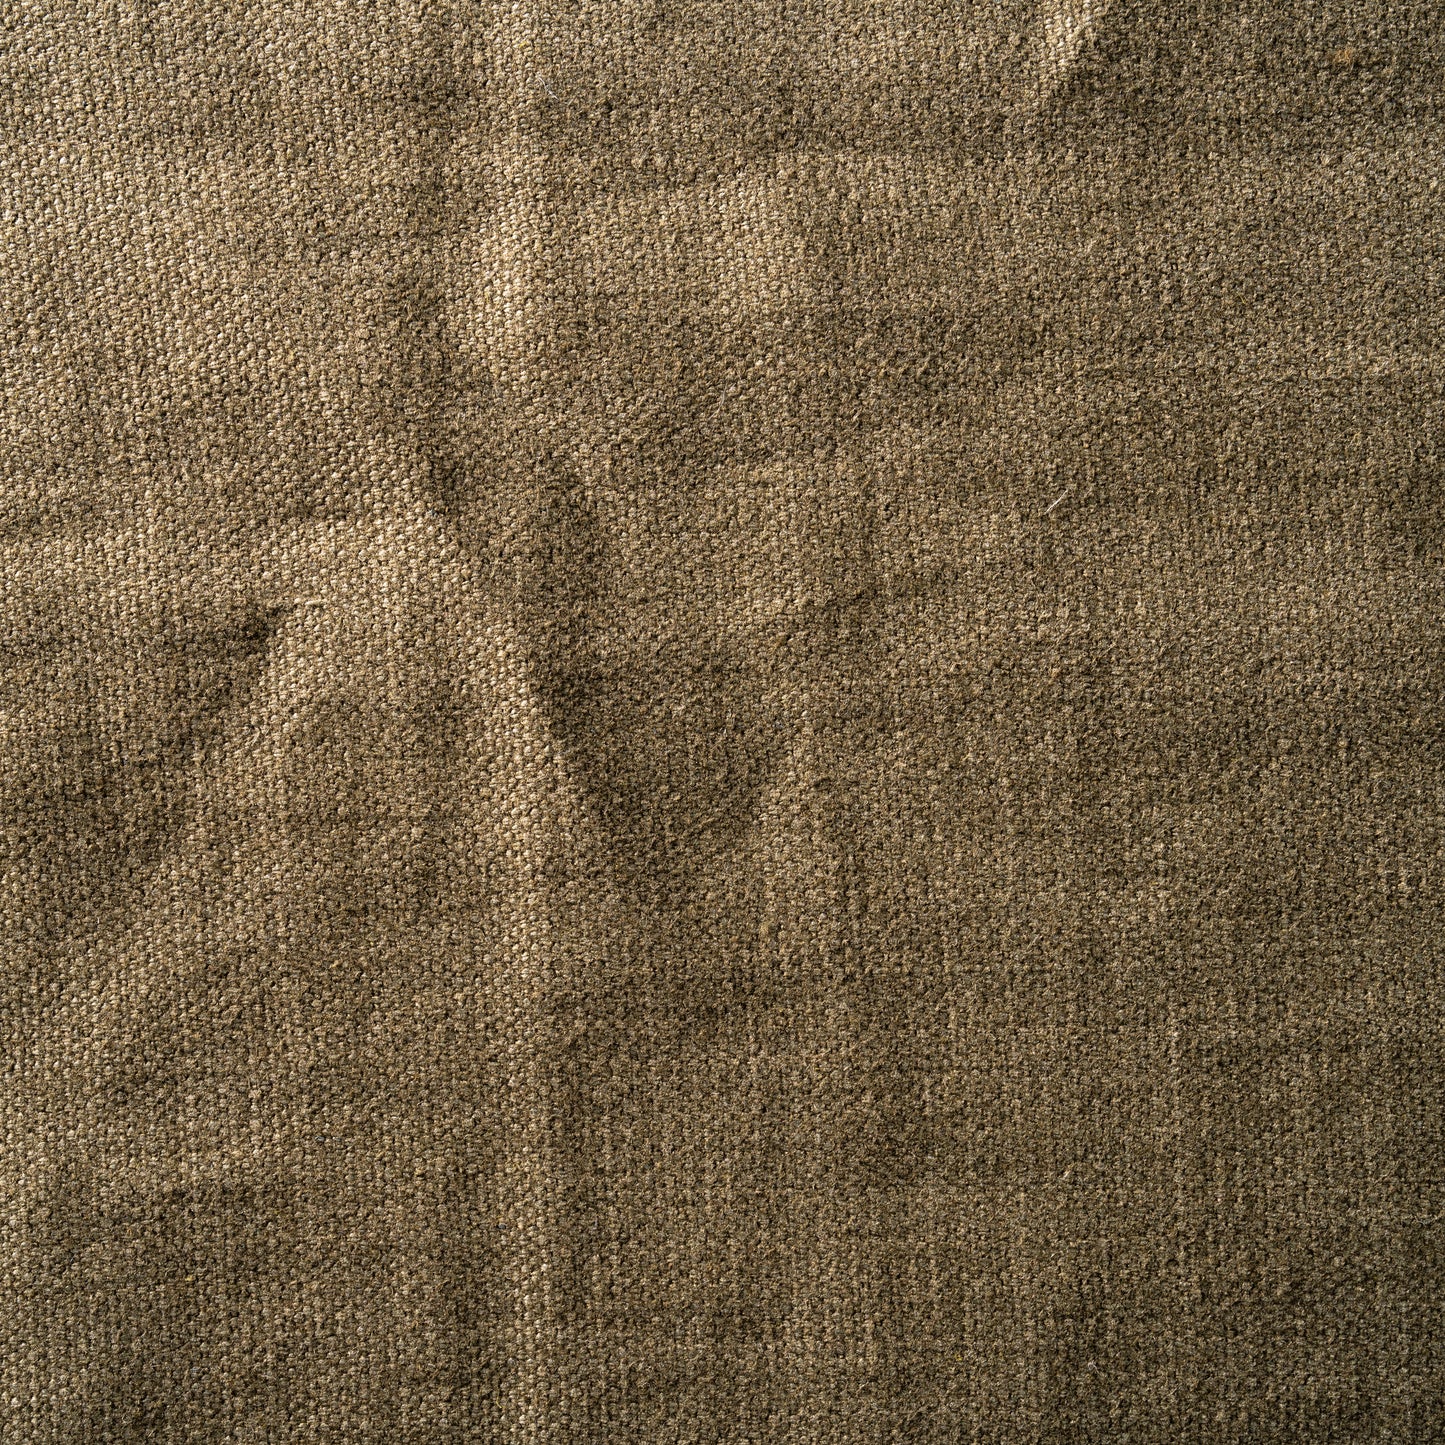 14.3 oz/sq yard 100% Upholstery/ Slipcover Weight Linen in Moss